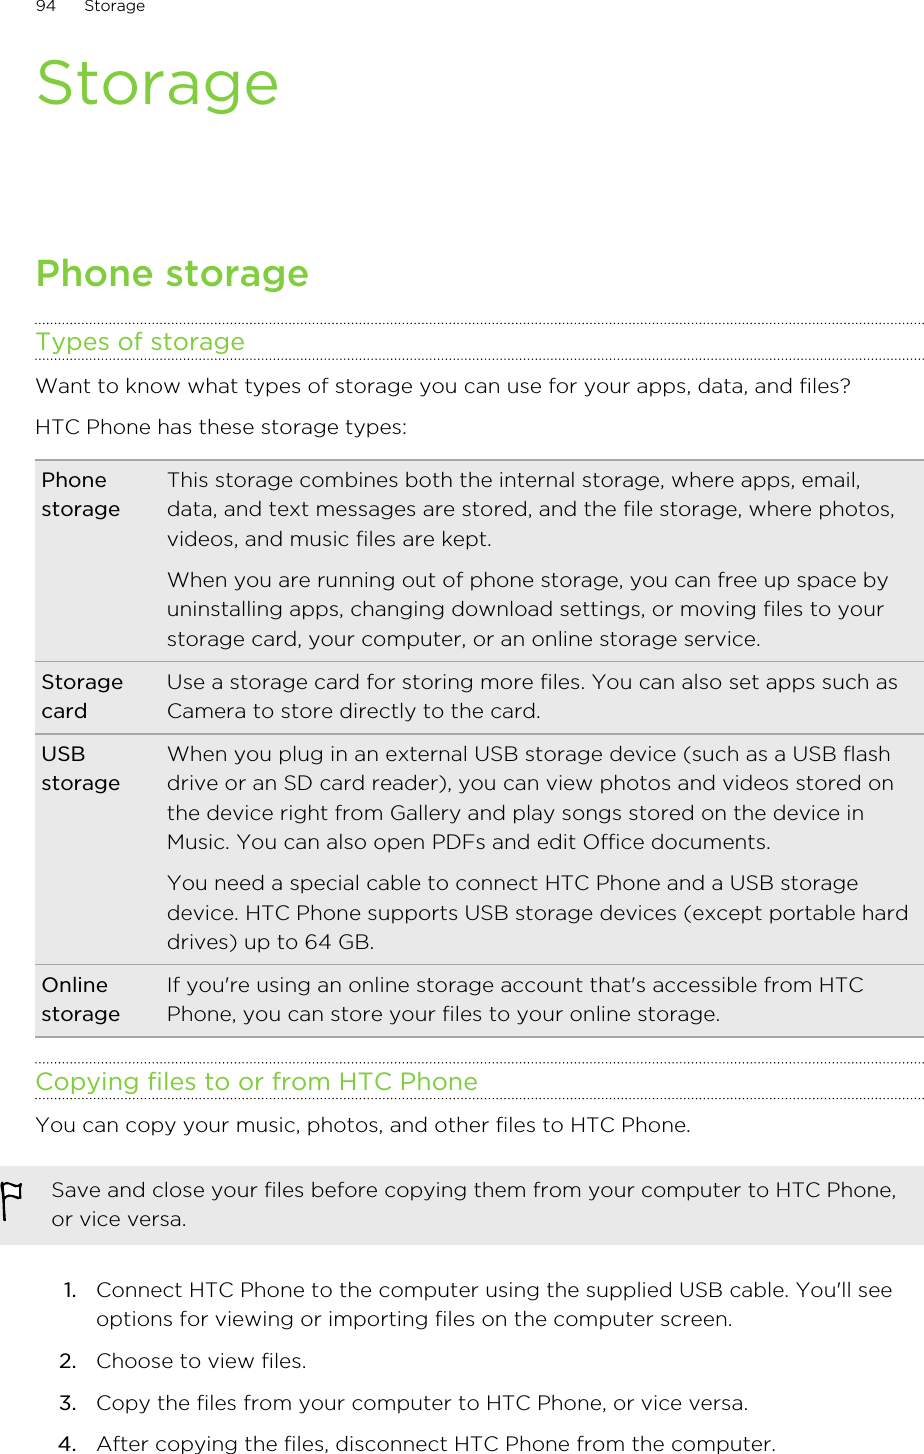 StoragePhone storageTypes of storageWant to know what types of storage you can use for your apps, data, and files?HTC Phone has these storage types:PhonestorageThis storage combines both the internal storage, where apps, email,data, and text messages are stored, and the file storage, where photos,videos, and music files are kept.When you are running out of phone storage, you can free up space byuninstalling apps, changing download settings, or moving files to yourstorage card, your computer, or an online storage service.StoragecardUse a storage card for storing more files. You can also set apps such asCamera to store directly to the card.USBstorageWhen you plug in an external USB storage device (such as a USB flashdrive or an SD card reader), you can view photos and videos stored onthe device right from Gallery and play songs stored on the device inMusic. You can also open PDFs and edit Office documents.You need a special cable to connect HTC Phone and a USB storagedevice. HTC Phone supports USB storage devices (except portable harddrives) up to 64 GB.OnlinestorageIf you&apos;re using an online storage account that&apos;s accessible from HTCPhone, you can store your files to your online storage.Copying files to or from HTC PhoneYou can copy your music, photos, and other files to HTC Phone.Save and close your files before copying them from your computer to HTC Phone,or vice versa.1. Connect HTC Phone to the computer using the supplied USB cable. You&apos;ll seeoptions for viewing or importing files on the computer screen.2. Choose to view files.3. Copy the files from your computer to HTC Phone, or vice versa.4. After copying the files, disconnect HTC Phone from the computer.94 StorageHTC Confidential for Certification HTC Confidential for Certification